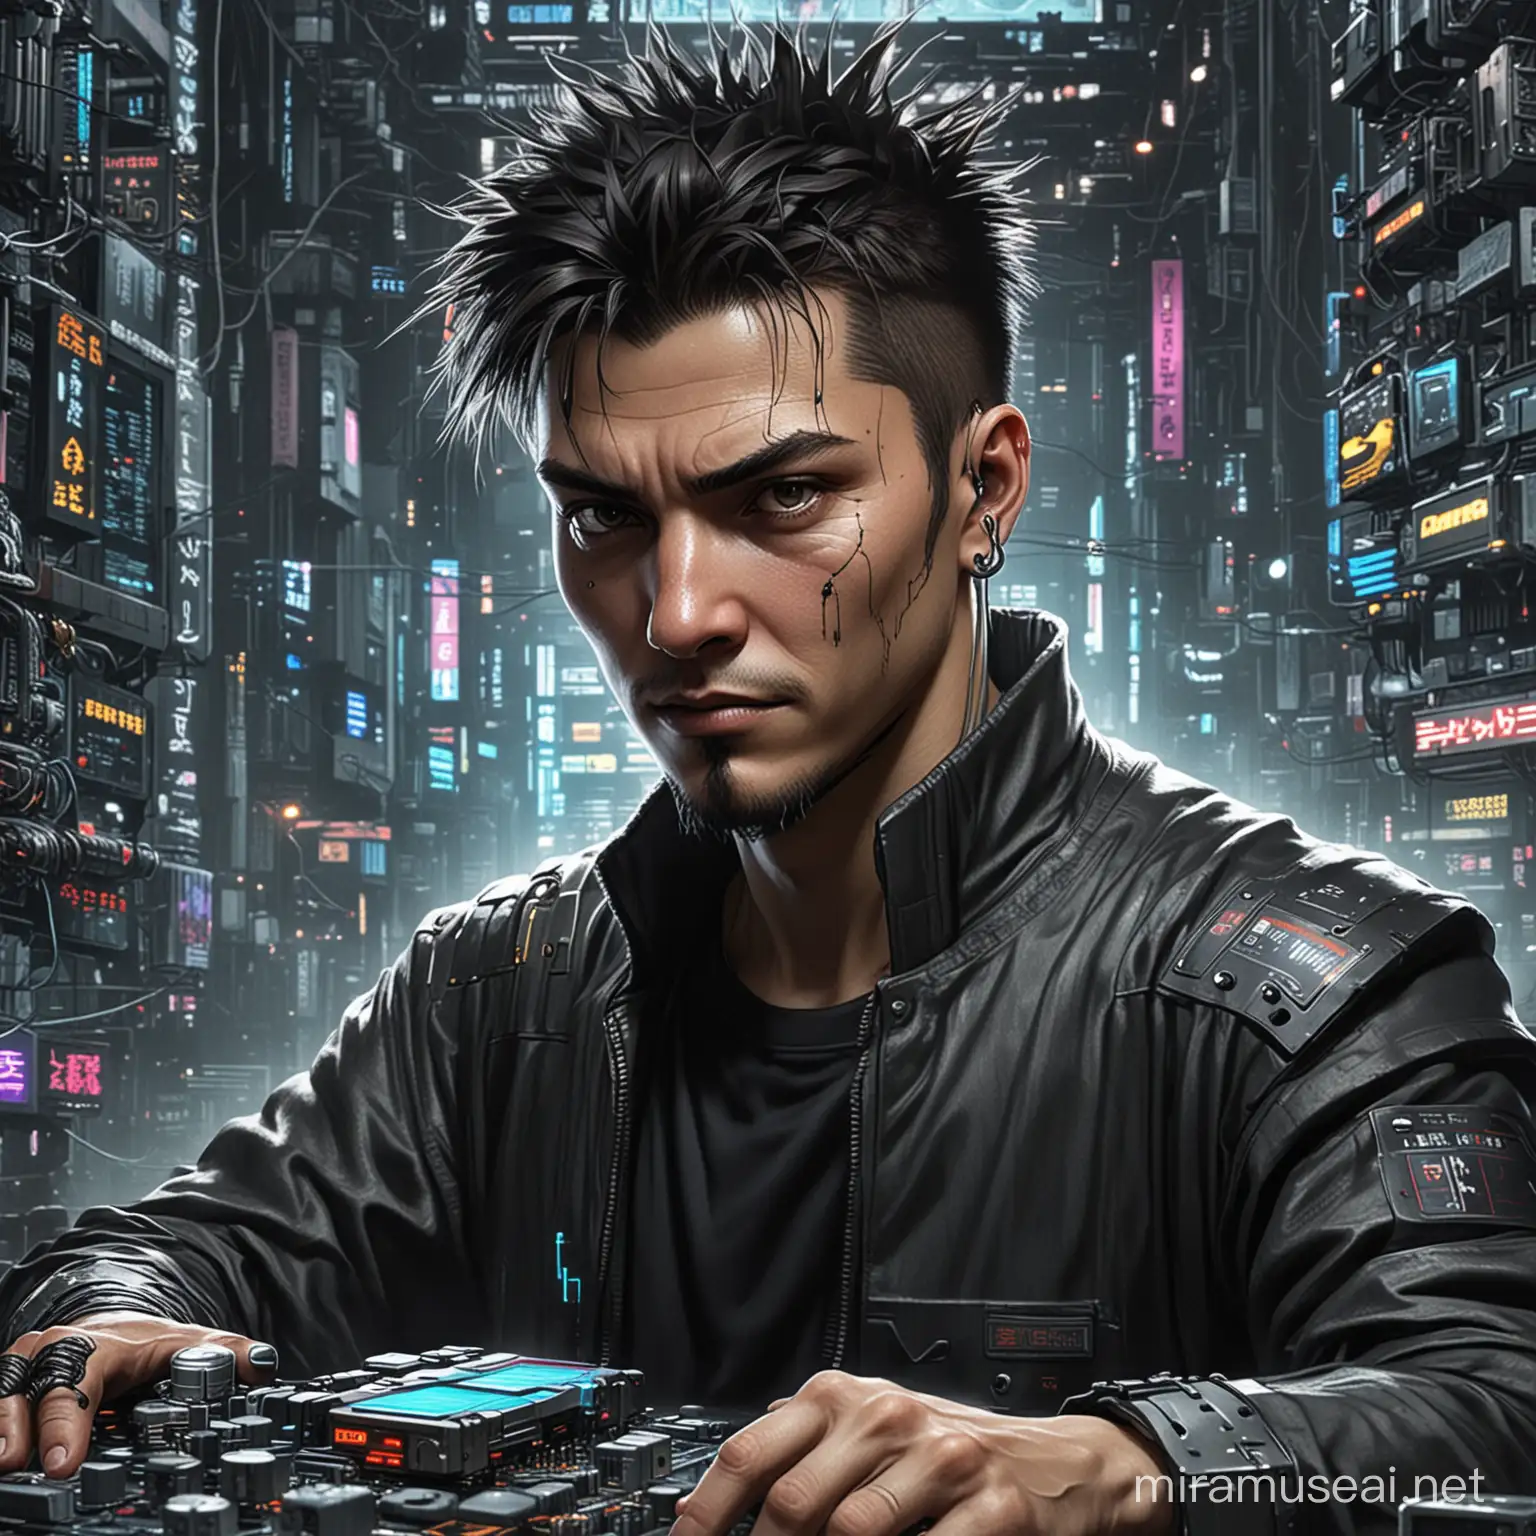 Cyberpunk from Neuromancer with electrodes jacked into his Ono Sendai deck running through cyberspace